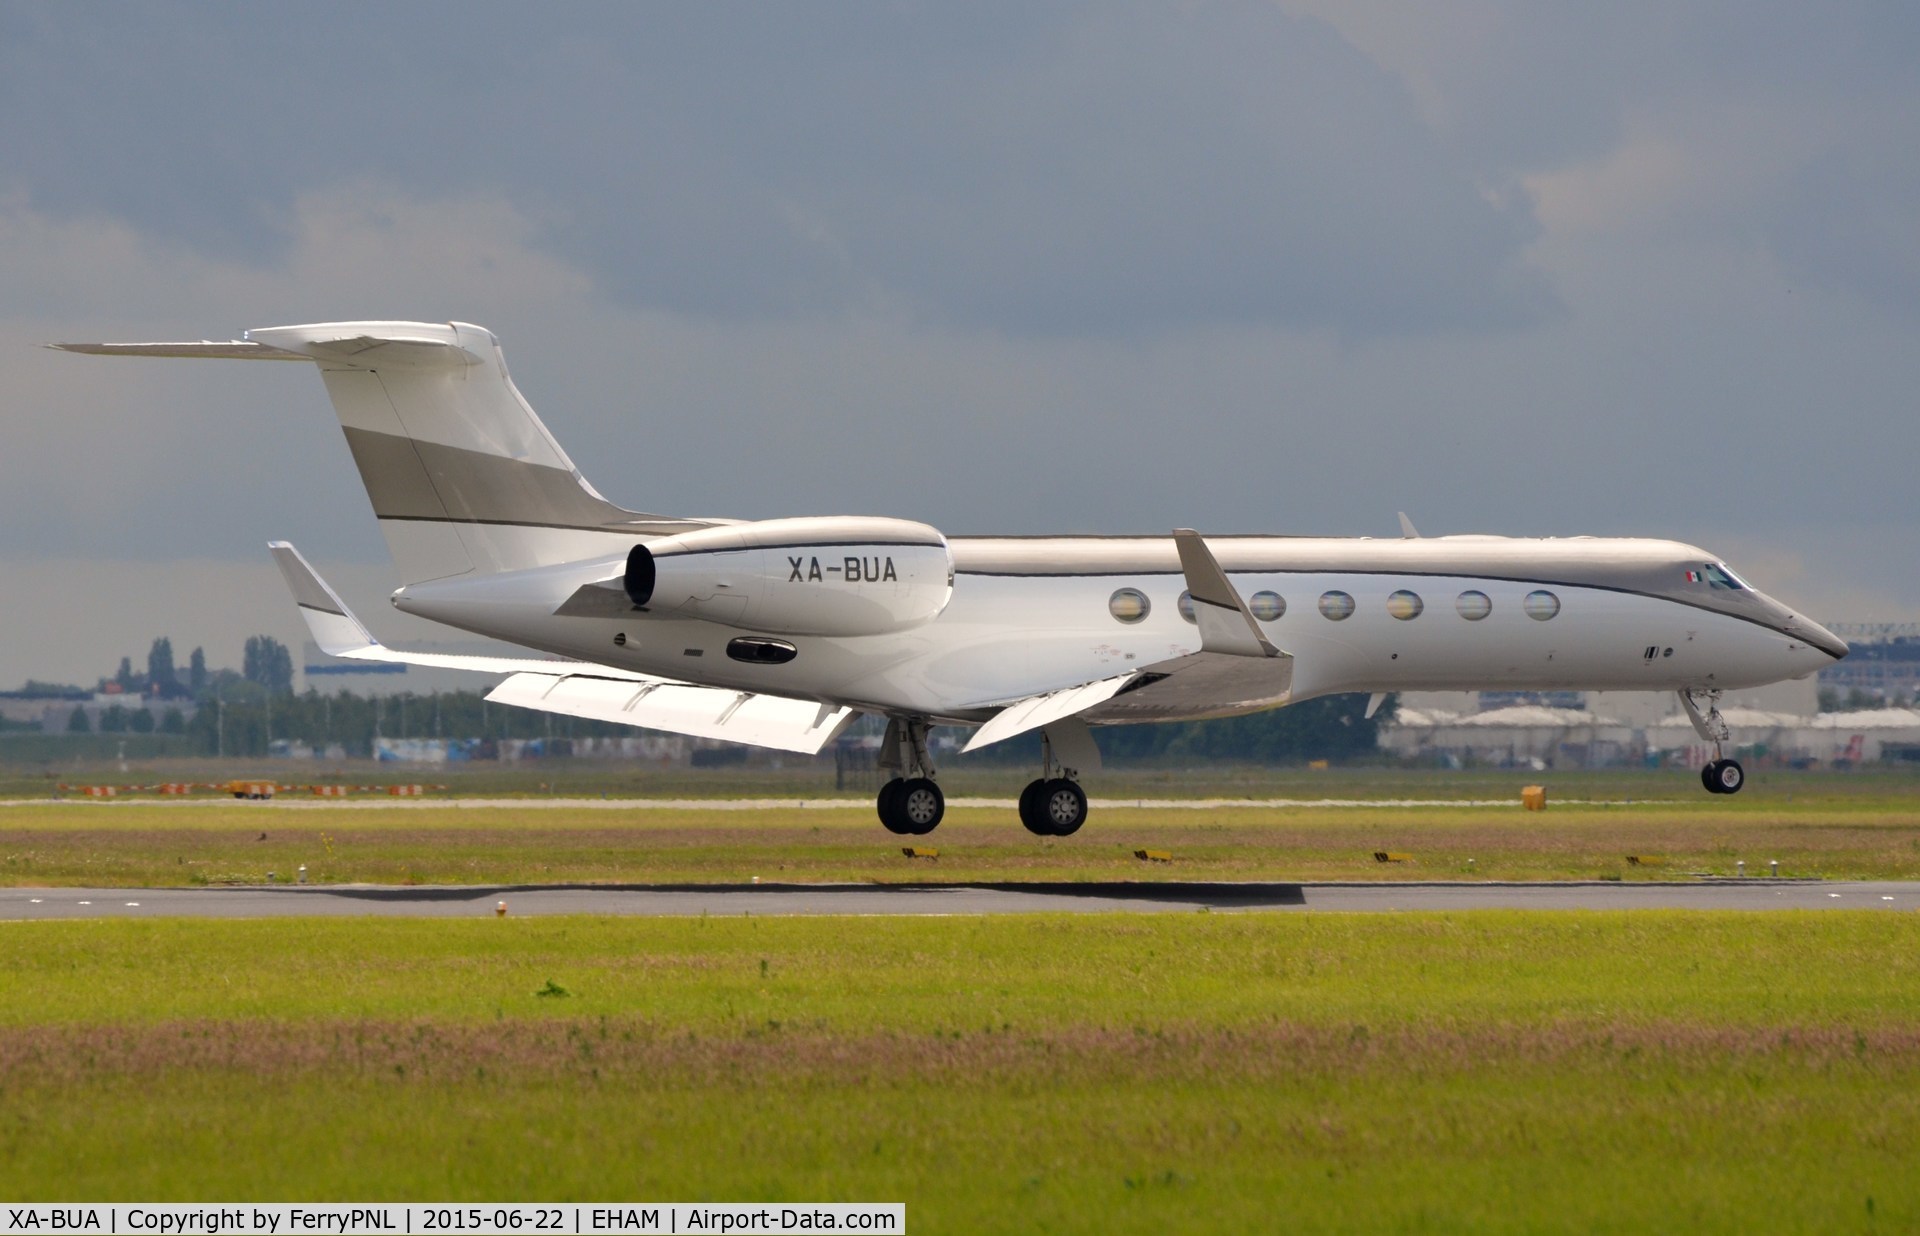 XA-BUA, 2014 Gulfstream Aerospace V-SP G550 C/N 5464, G550 about to touch down